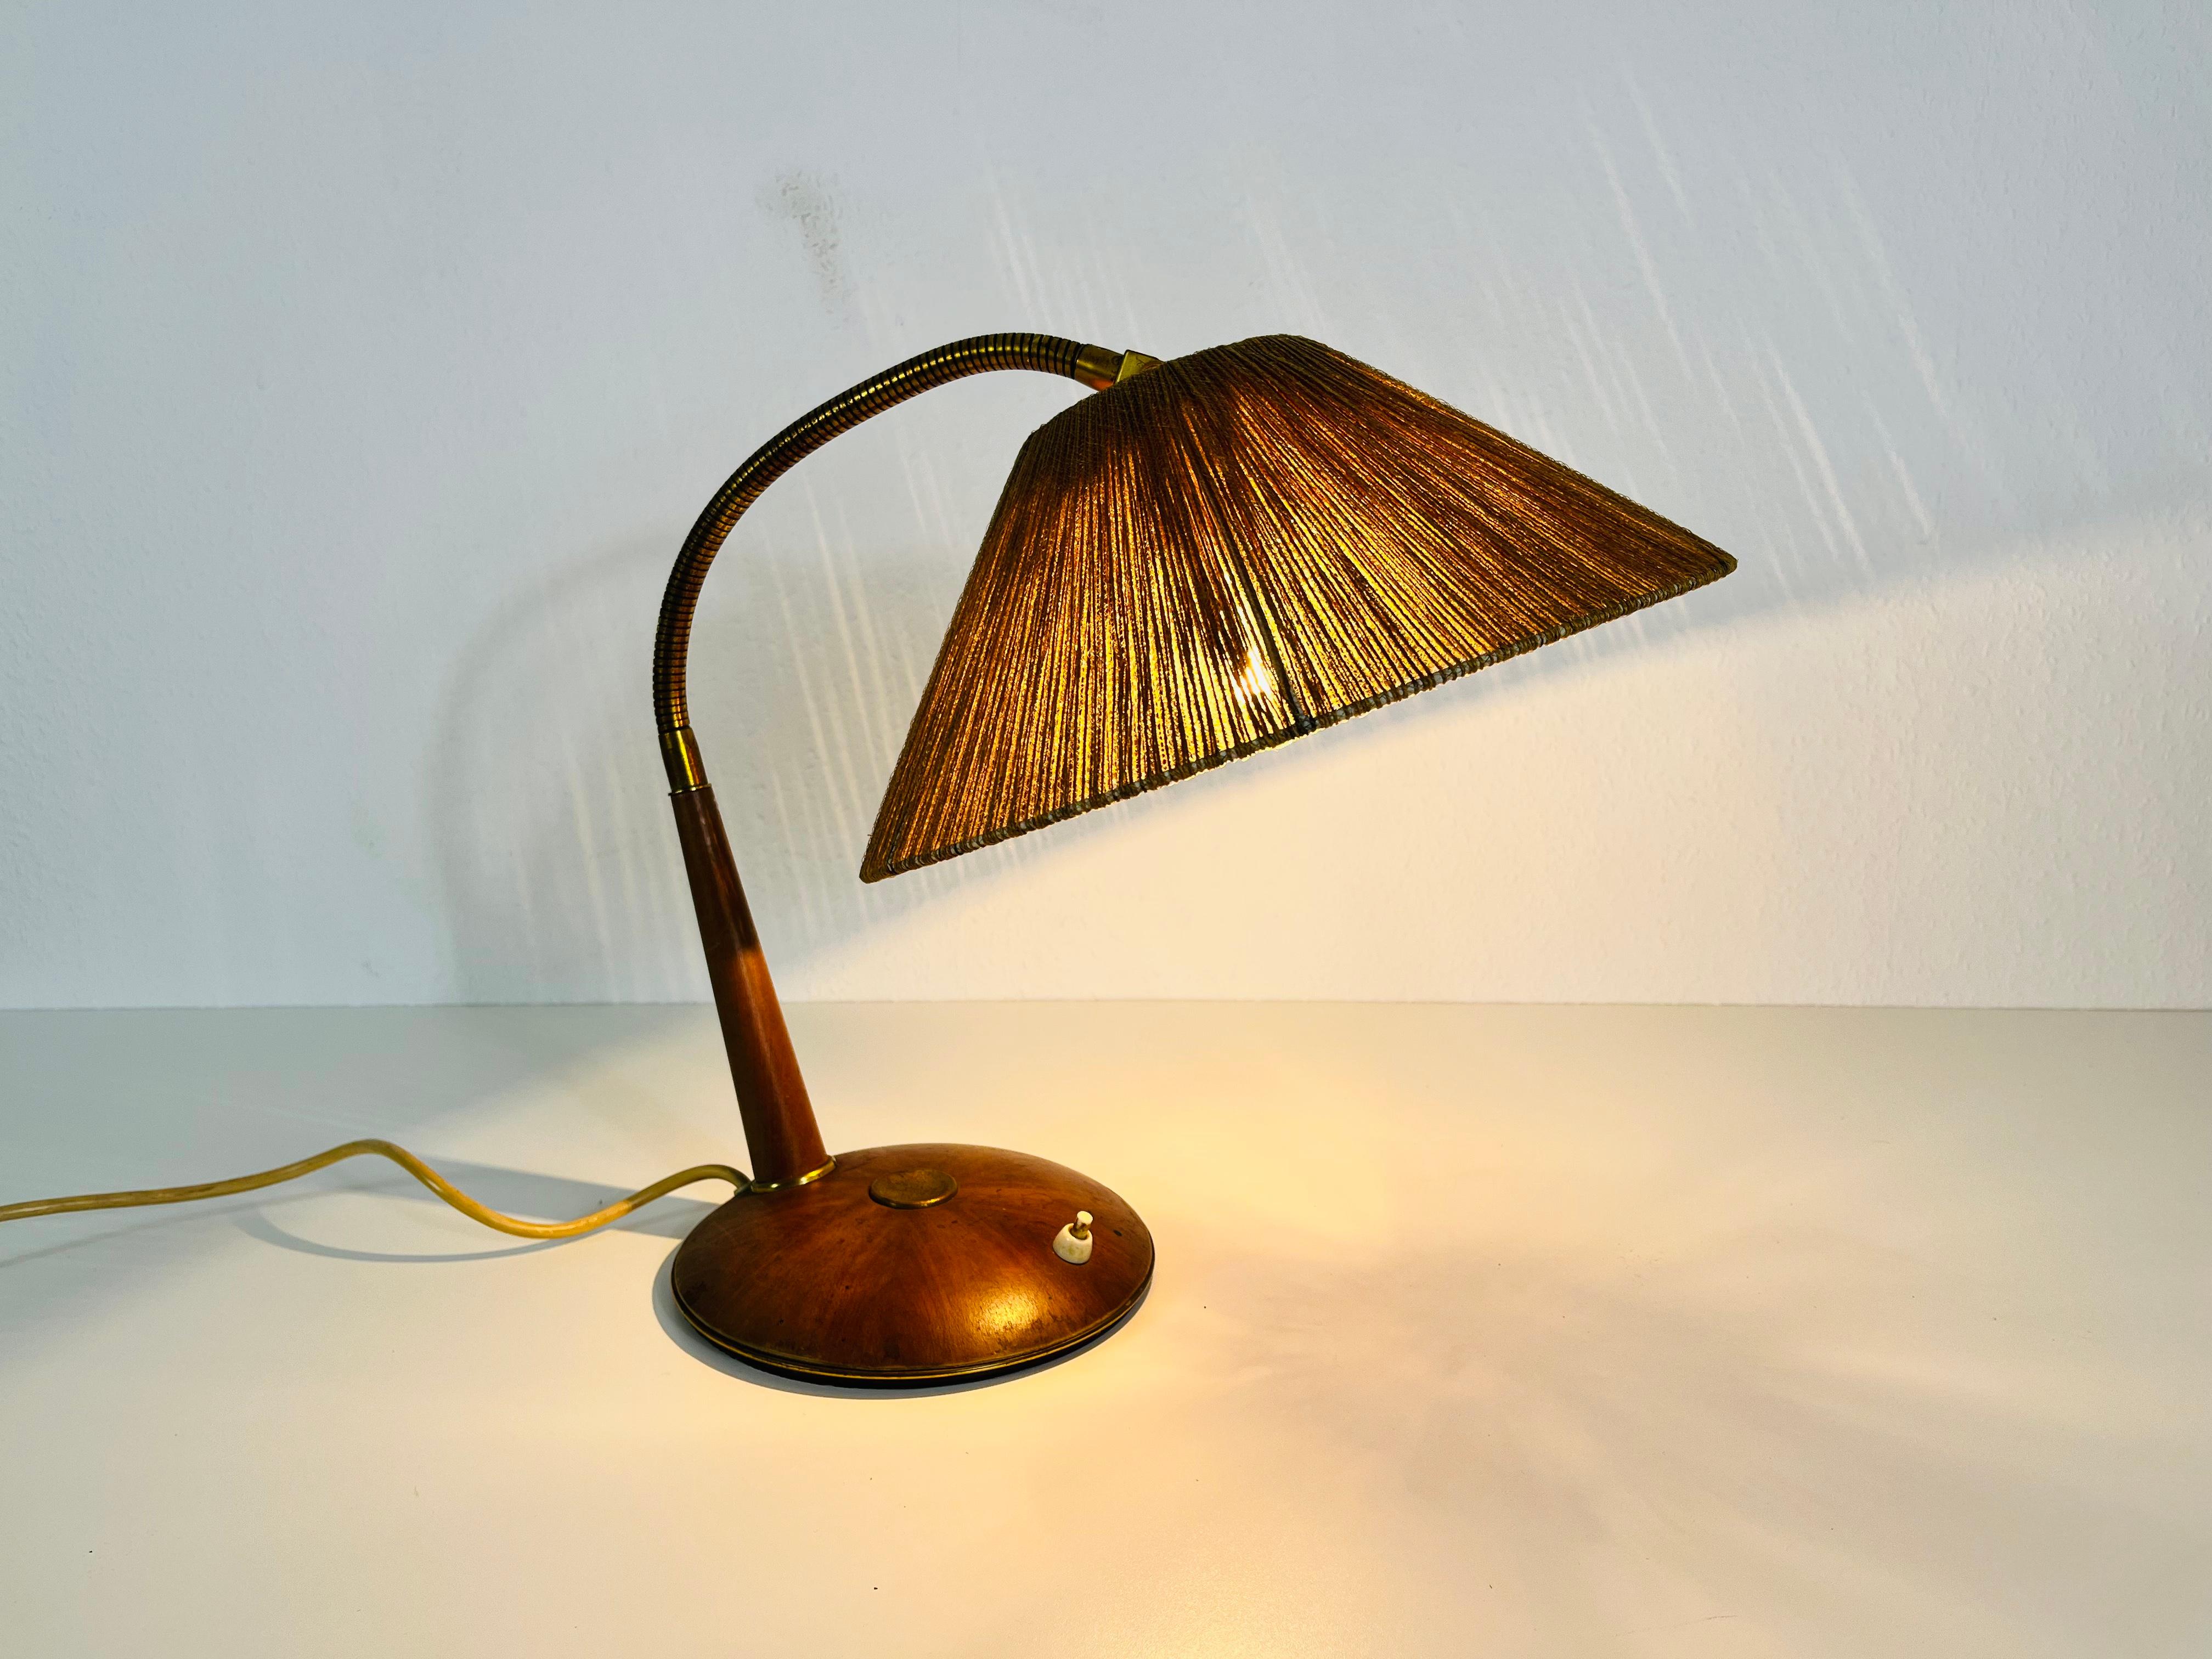 Midcentury Teak and Rattan Table Lamp by Temde, circa 1970 For Sale 4